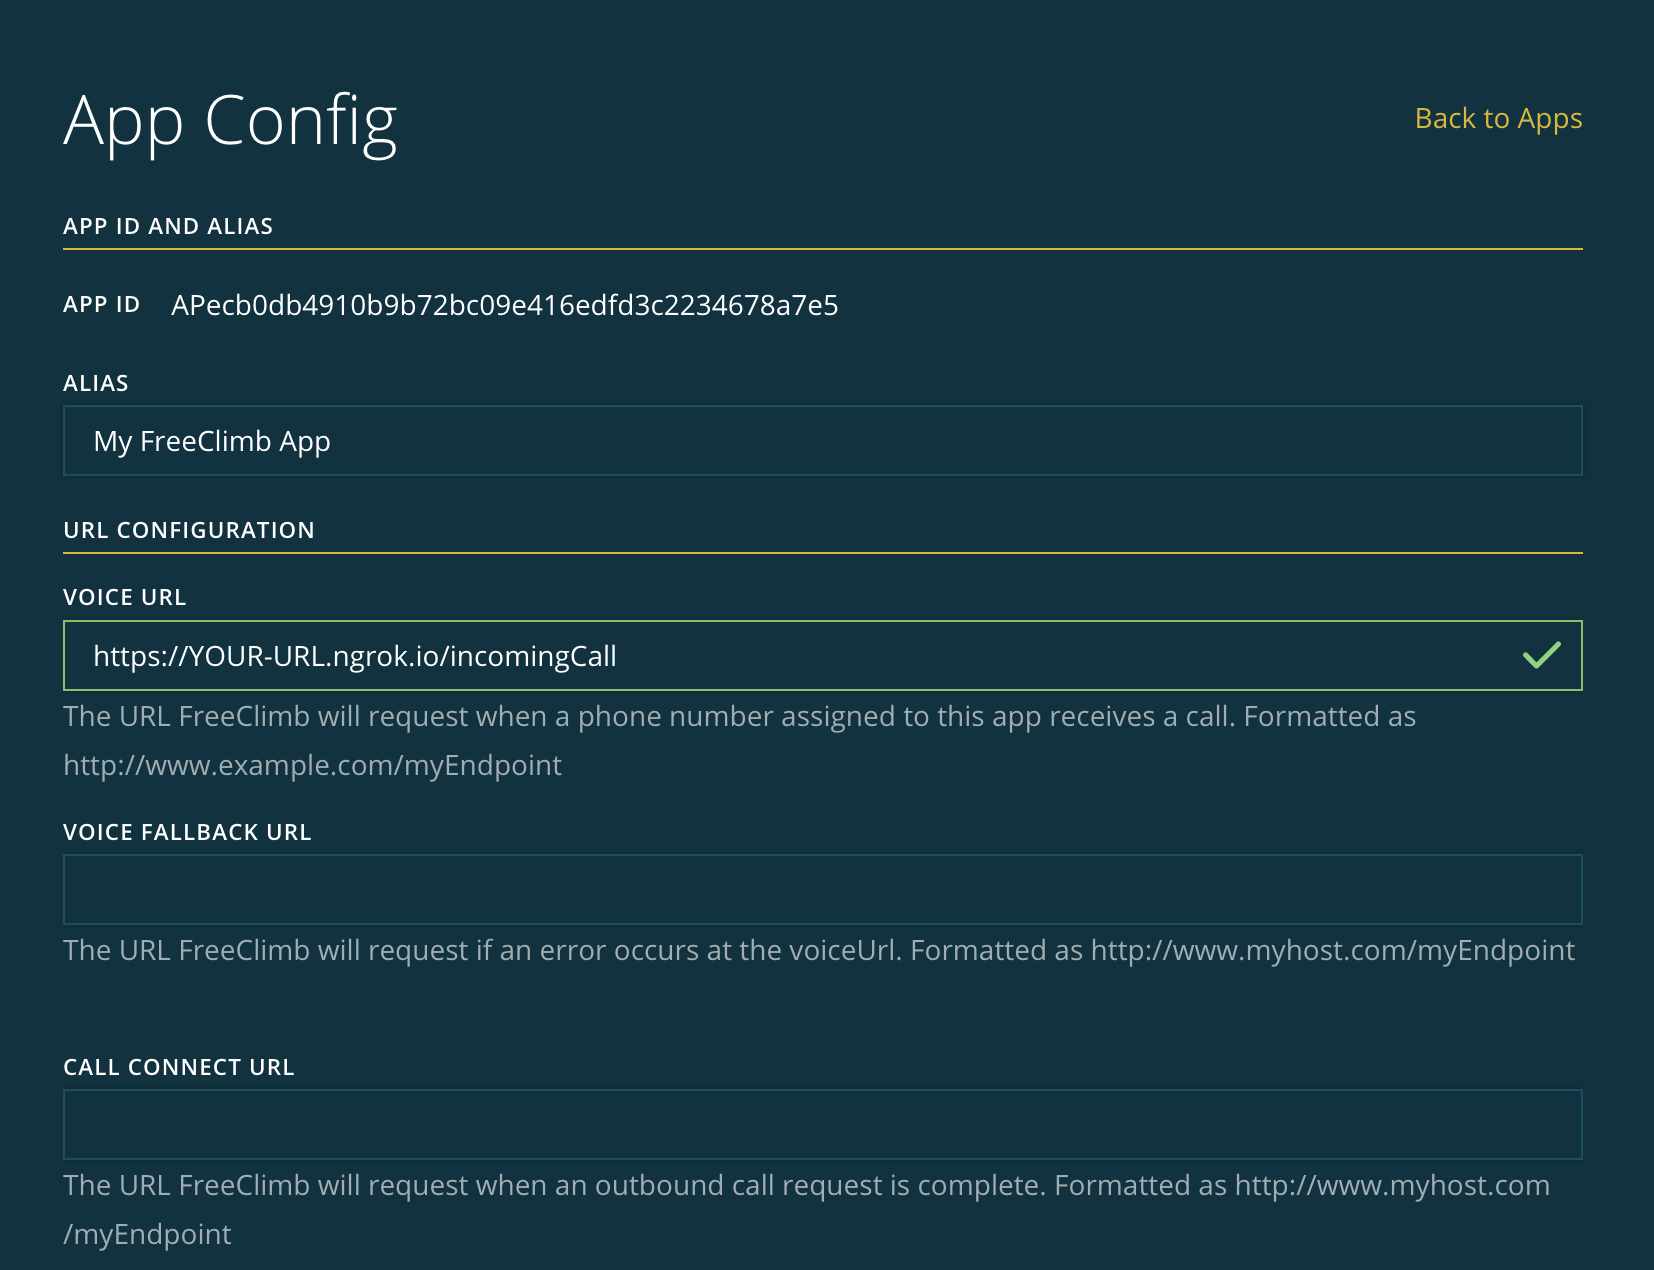 Example of a completed App Config.